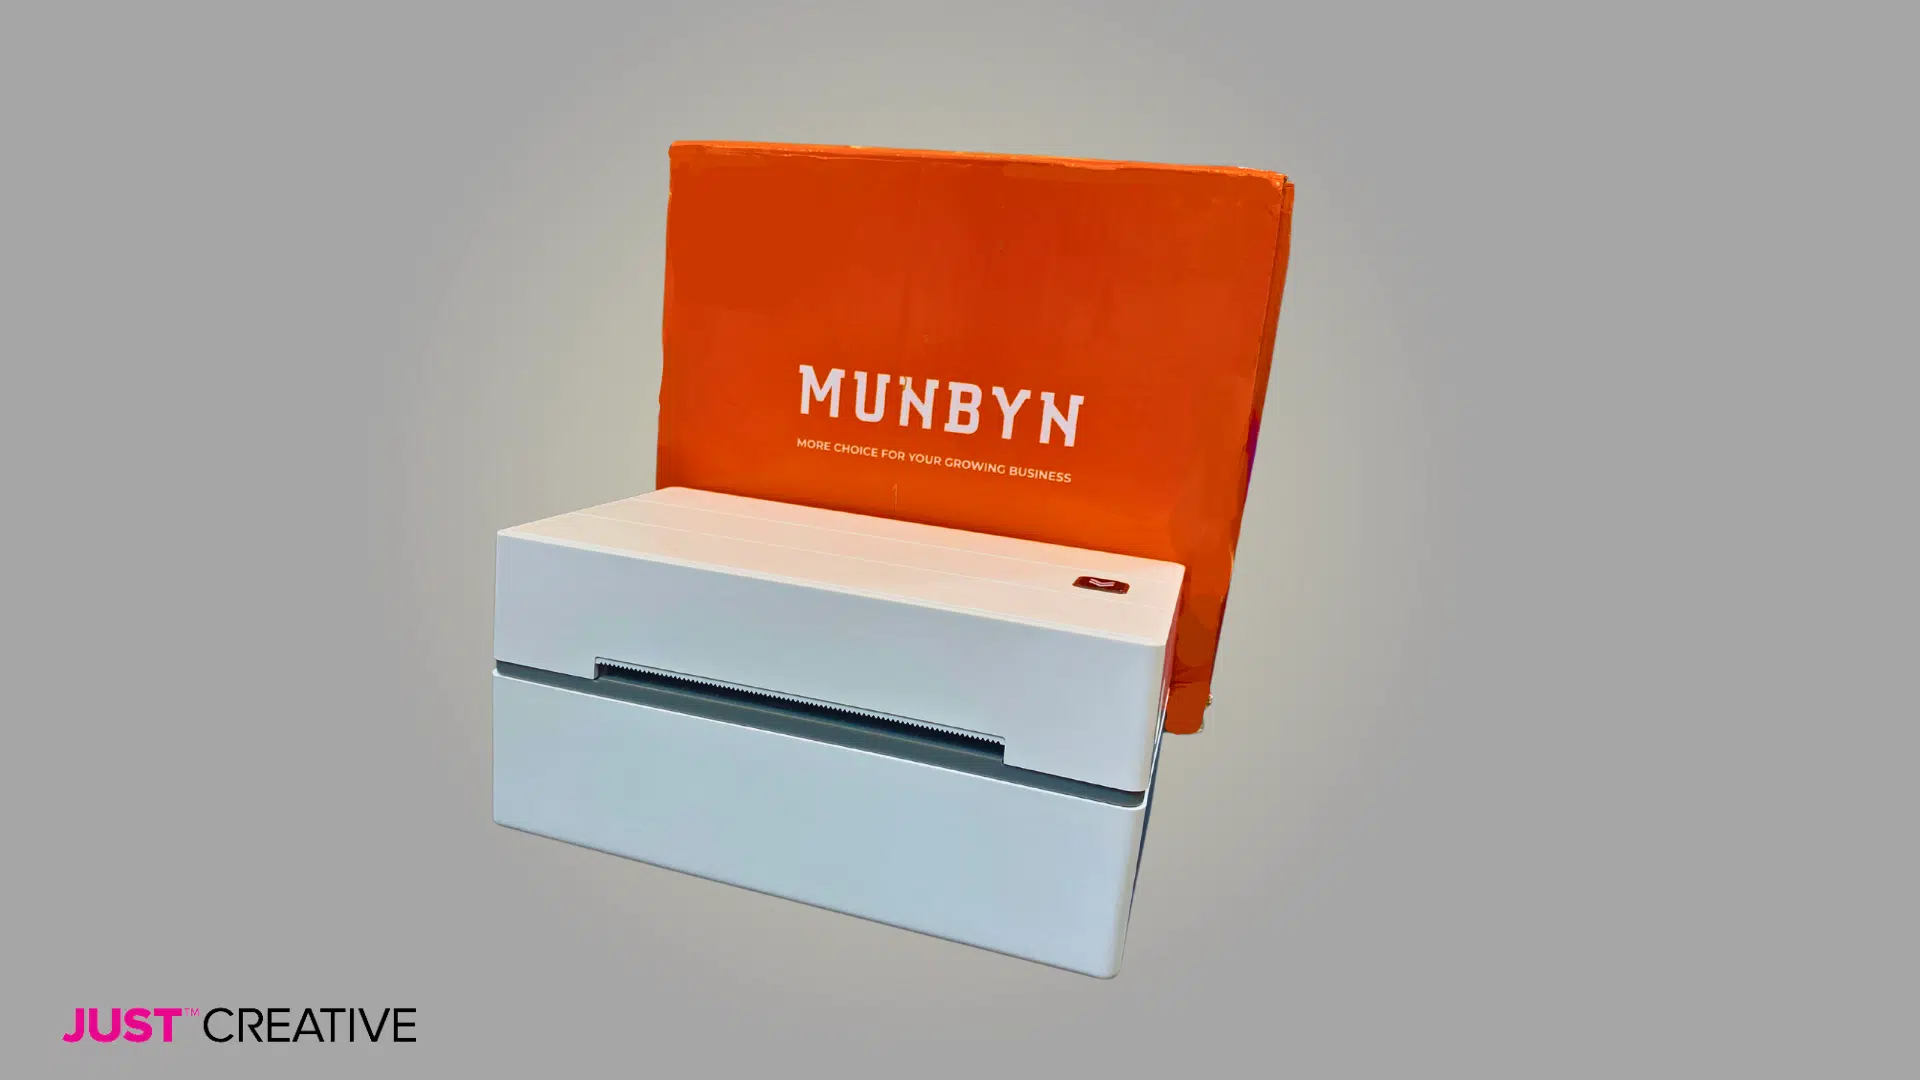 Munbyn Thermal Label Printer  Unboxing, Review, & a Quick First Project